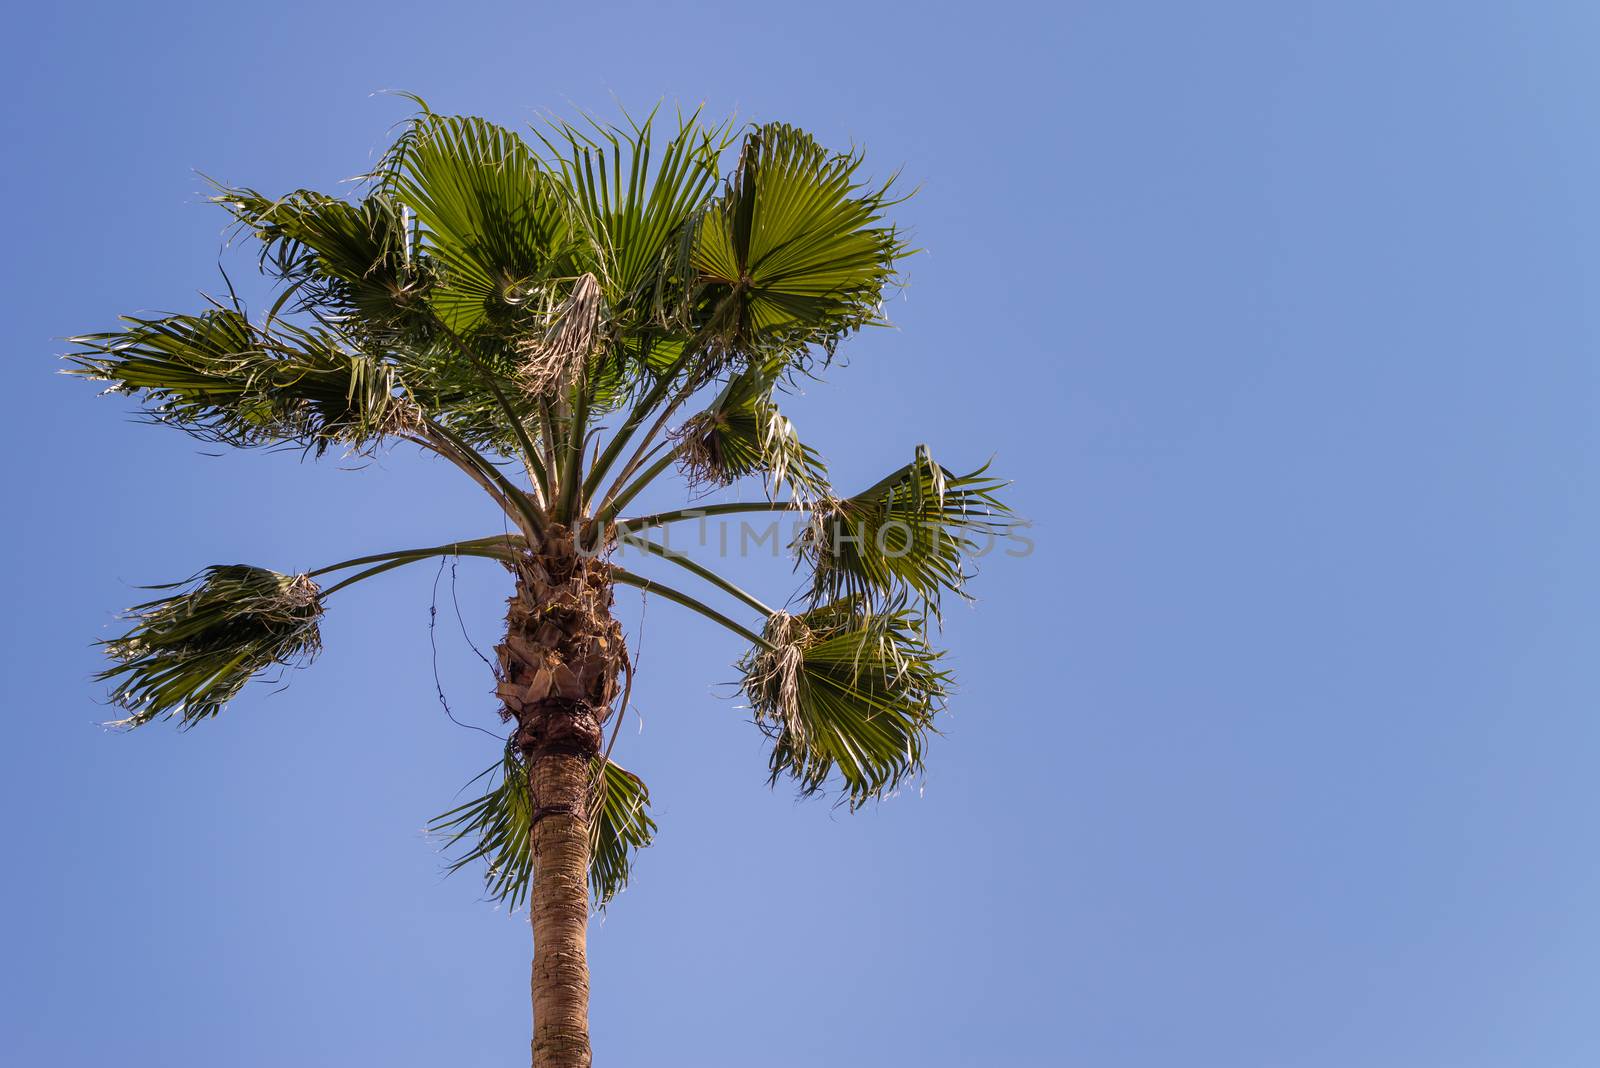 A palm tree blowing in the wind on a clear blue sky background.